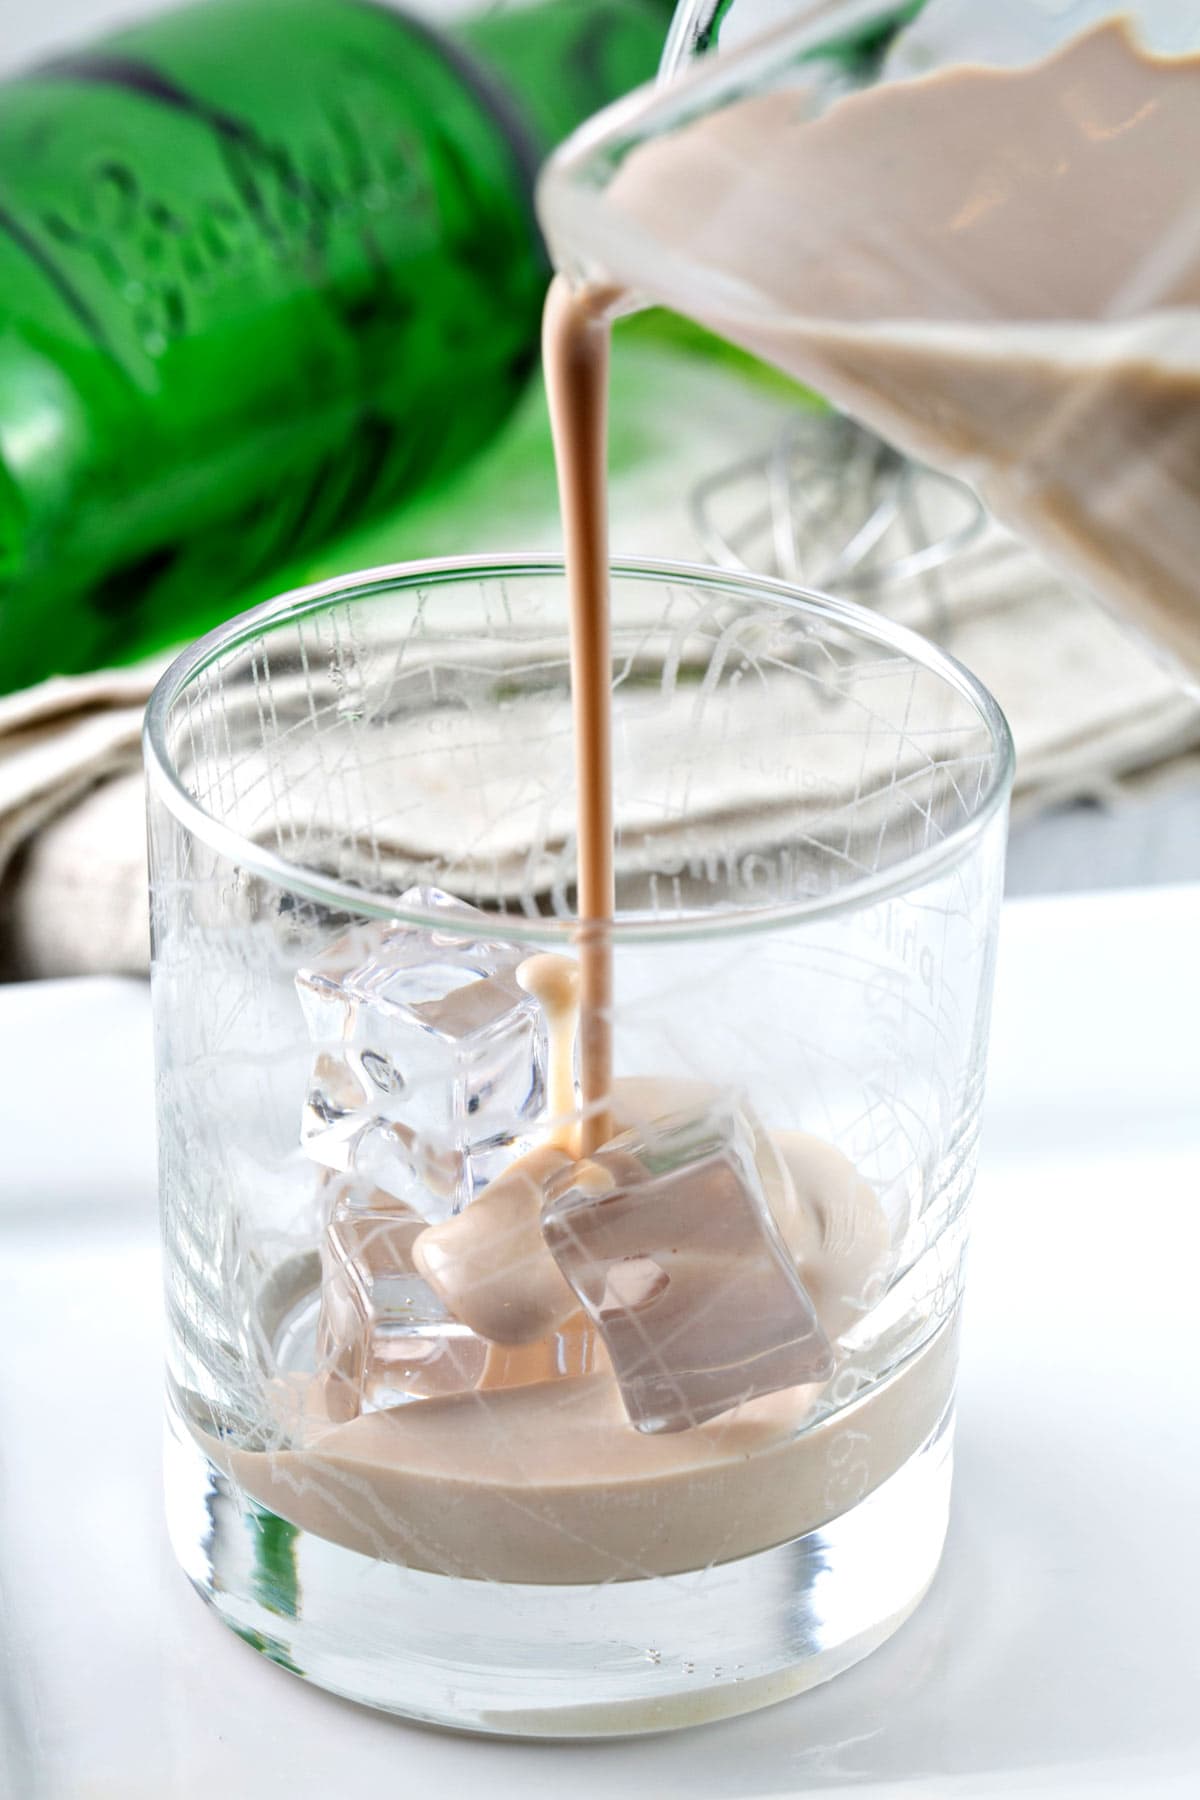 pouring irish cream from a small pitcher into a rocks glass with ice cubes.